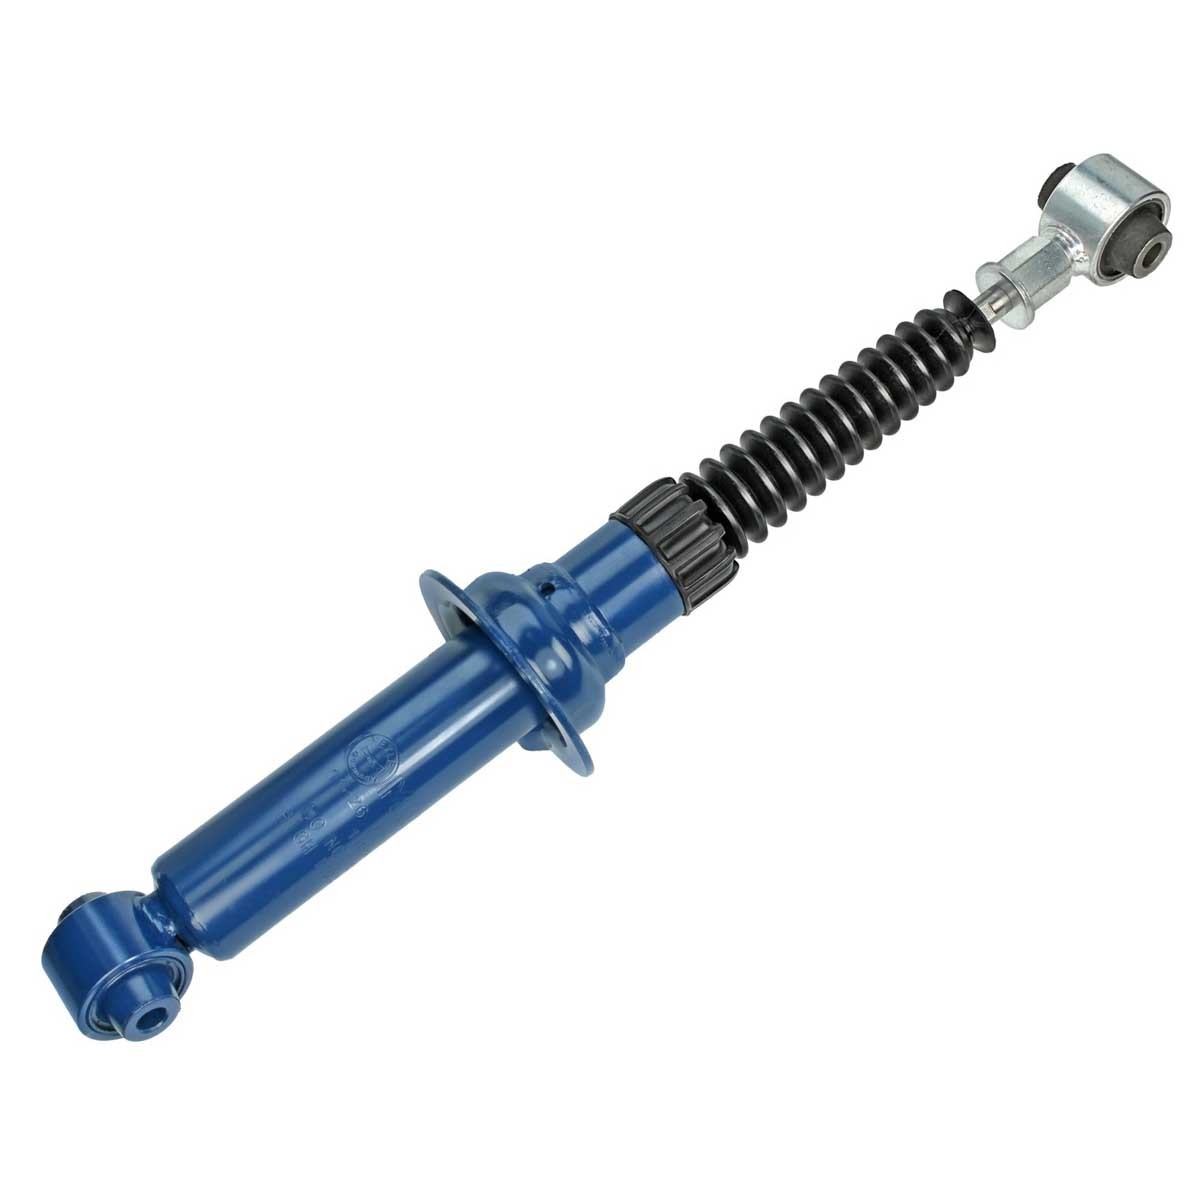 MEYLE 11-26 725 0002 Shock absorber Rear Axle, Gas Pressure, Twin-Tube, Spring-bearing Damper, Top pin, Bottom eye, ORIGINAL Quality, with protective cap/bellow